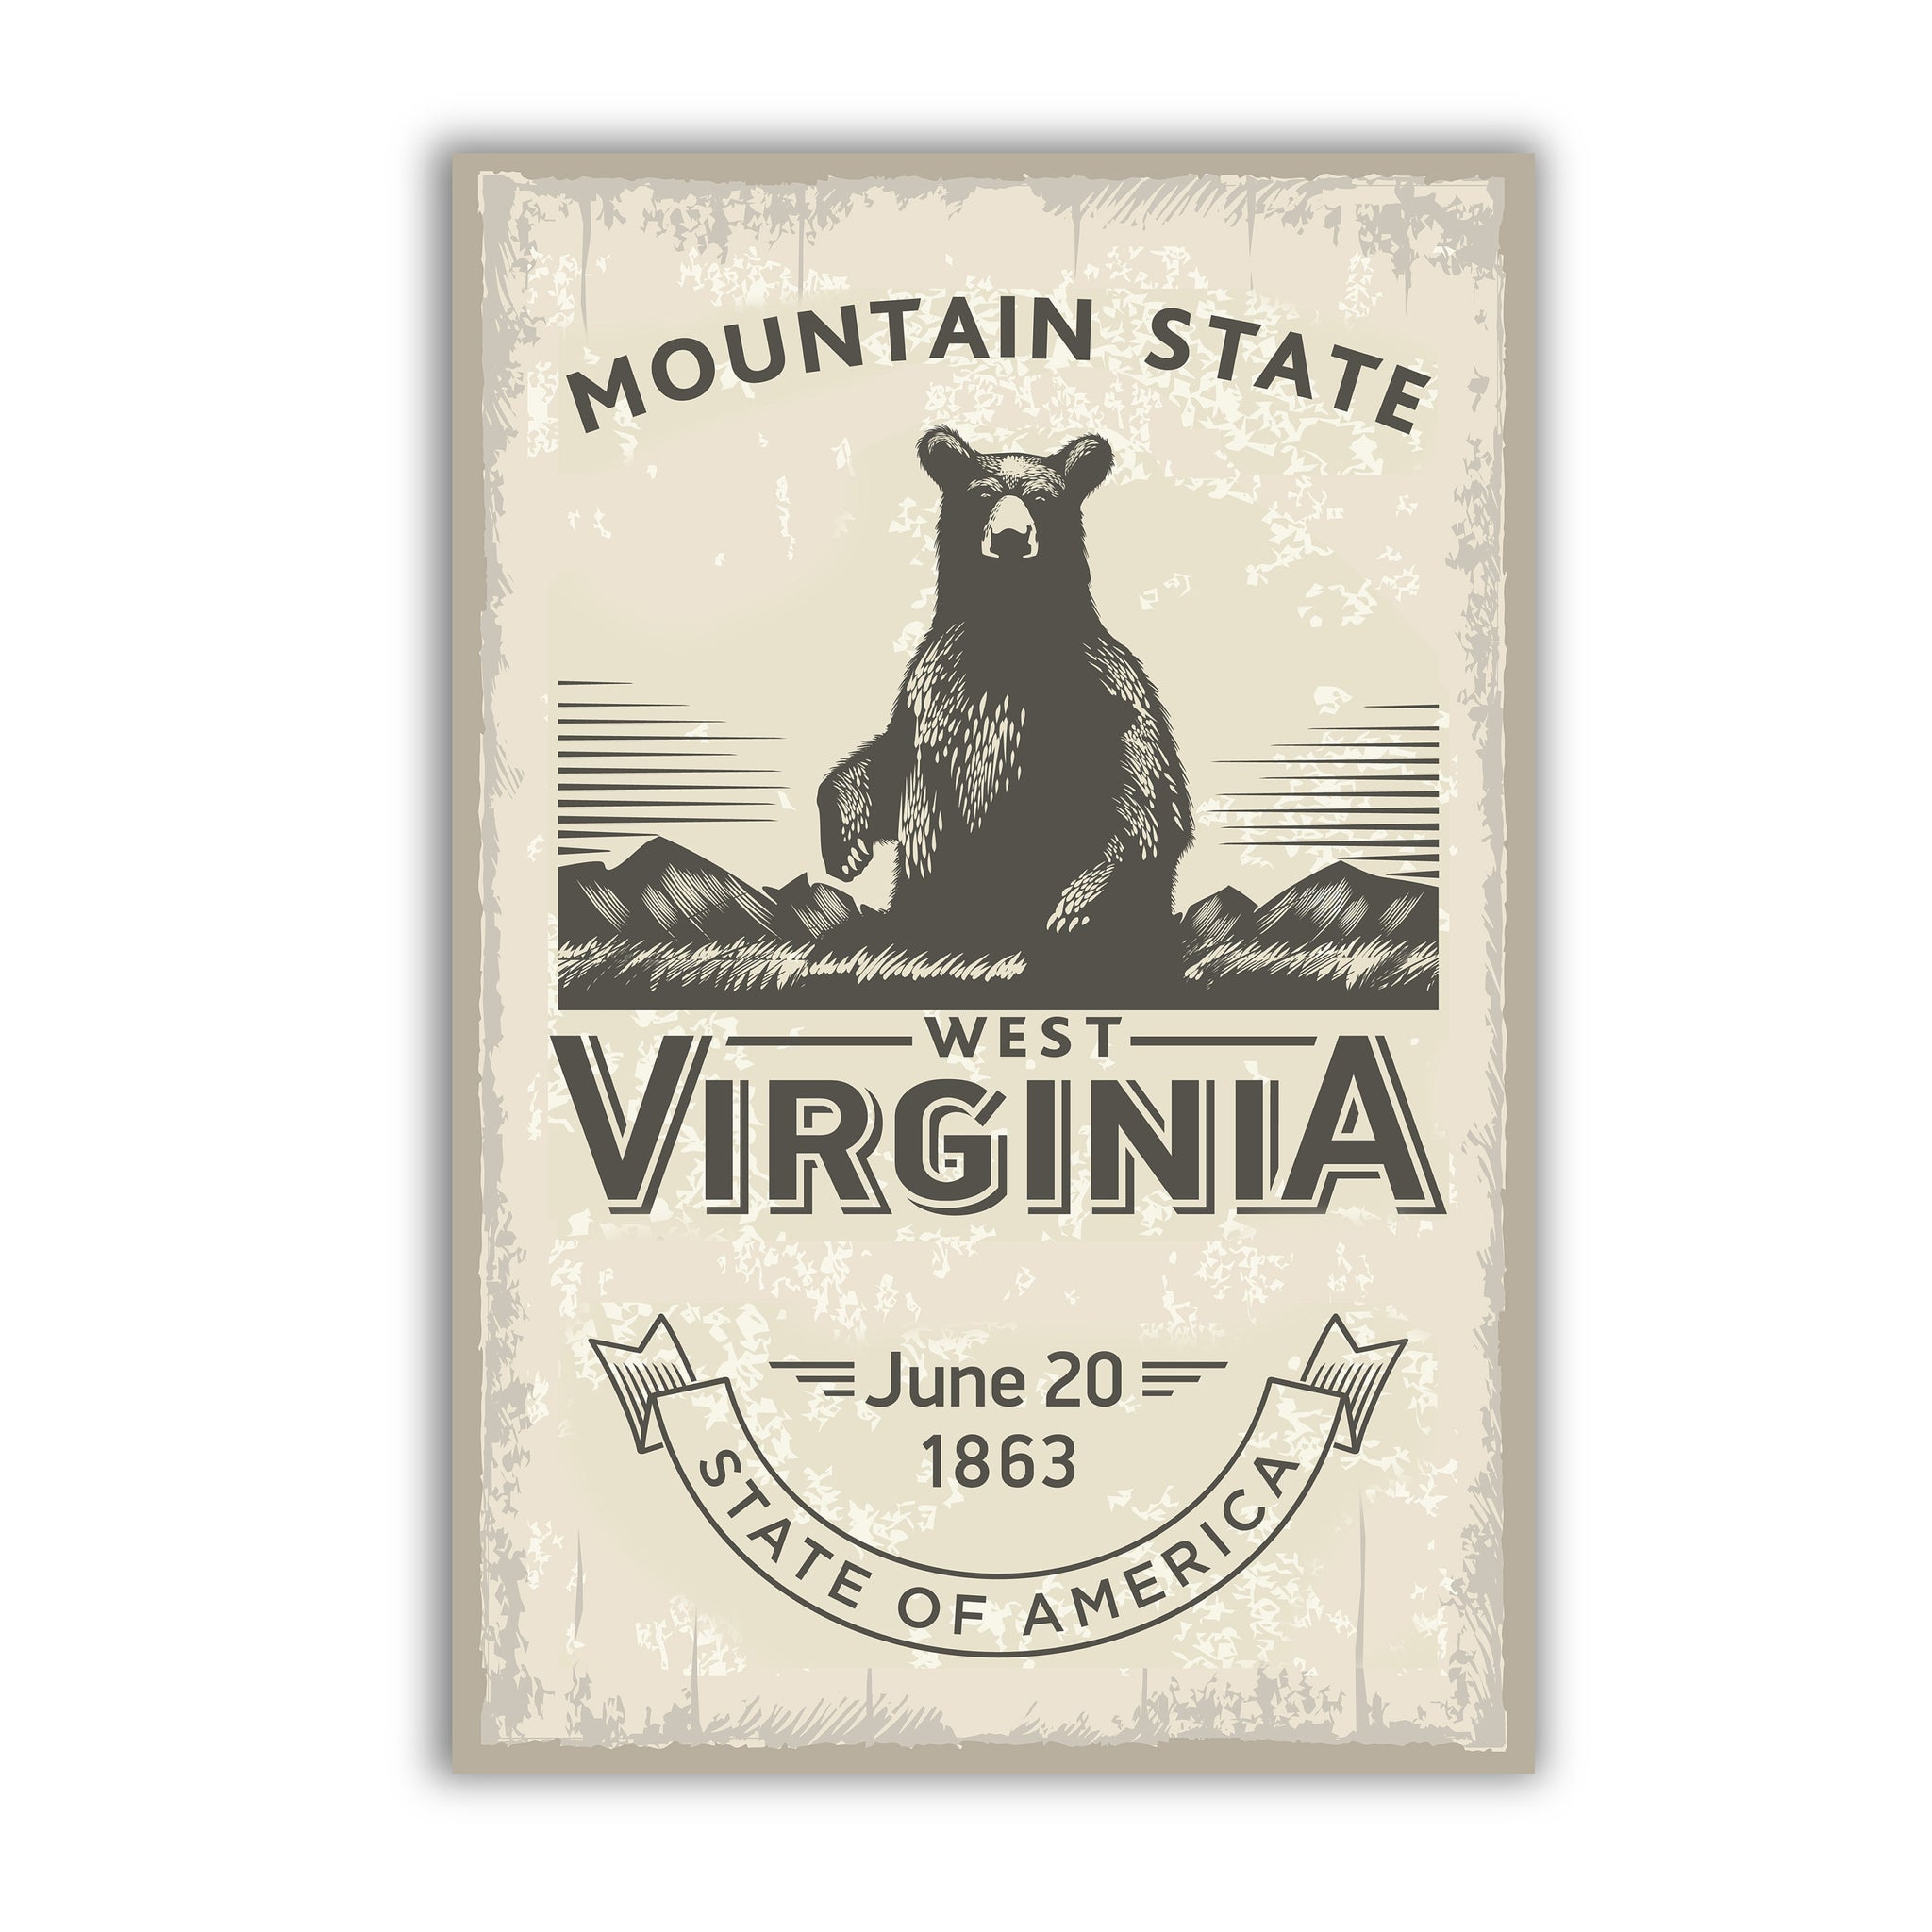 West Virginia State Symbol Poster, Poster Print, West Virginia State Emblem Poster, Retro Travel State Poster, Home and Office Wall Art